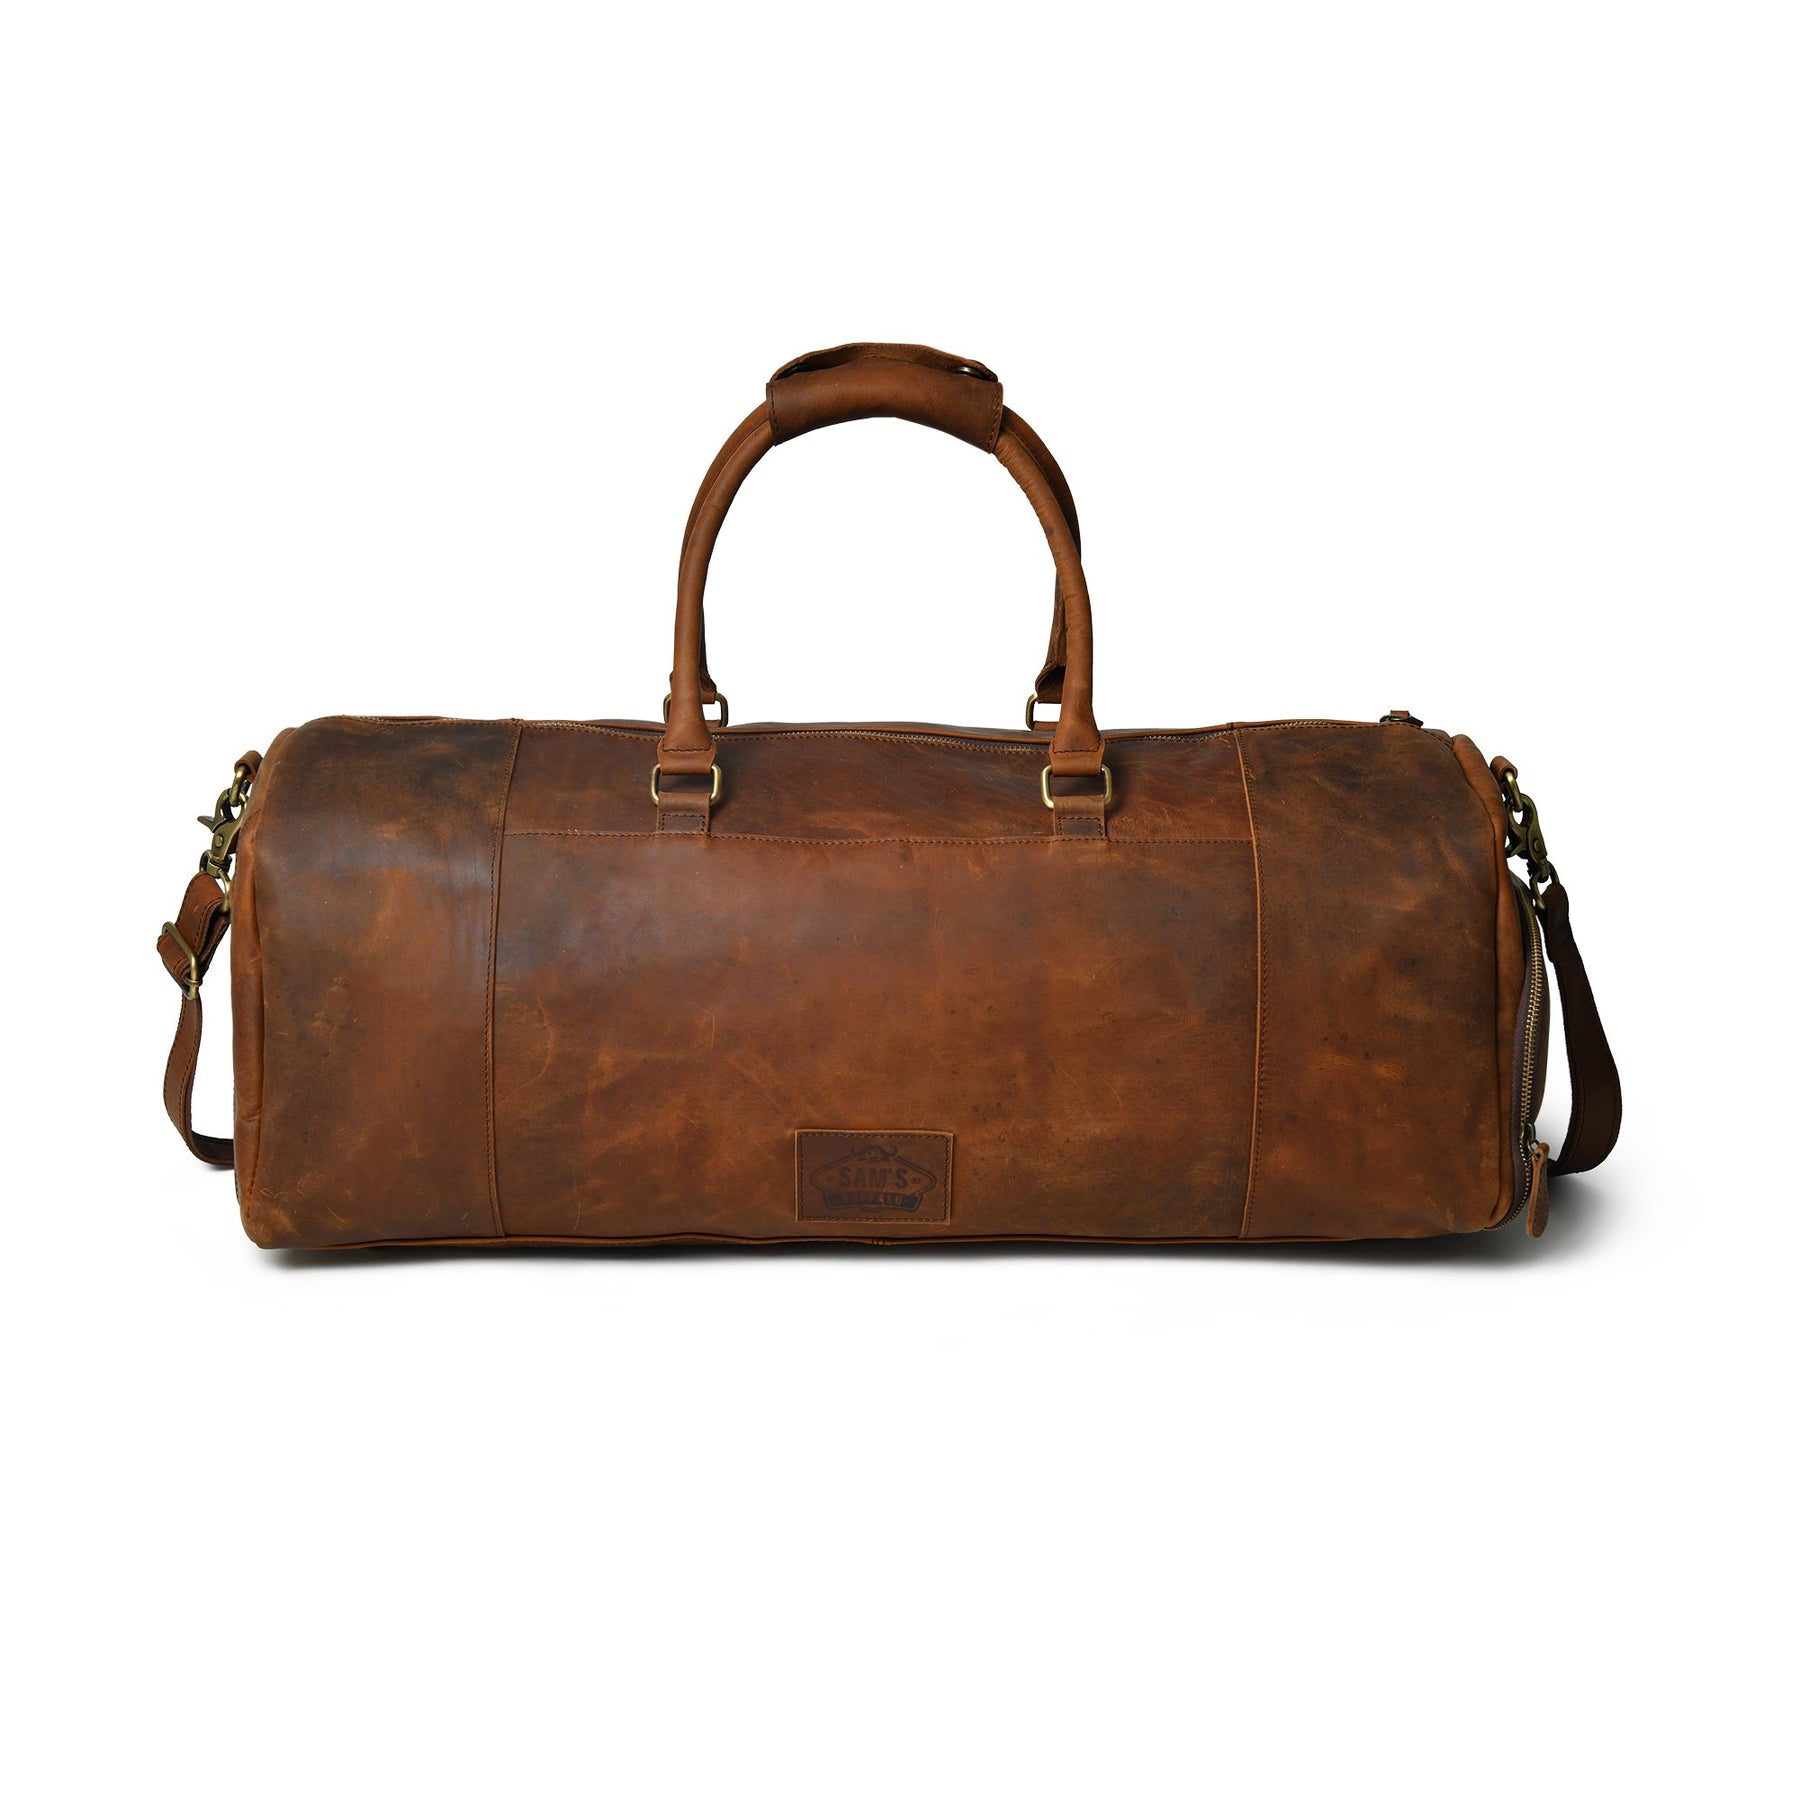 Buy Buffalo Leather Duffel Bag Online in USA at Lowest Prices